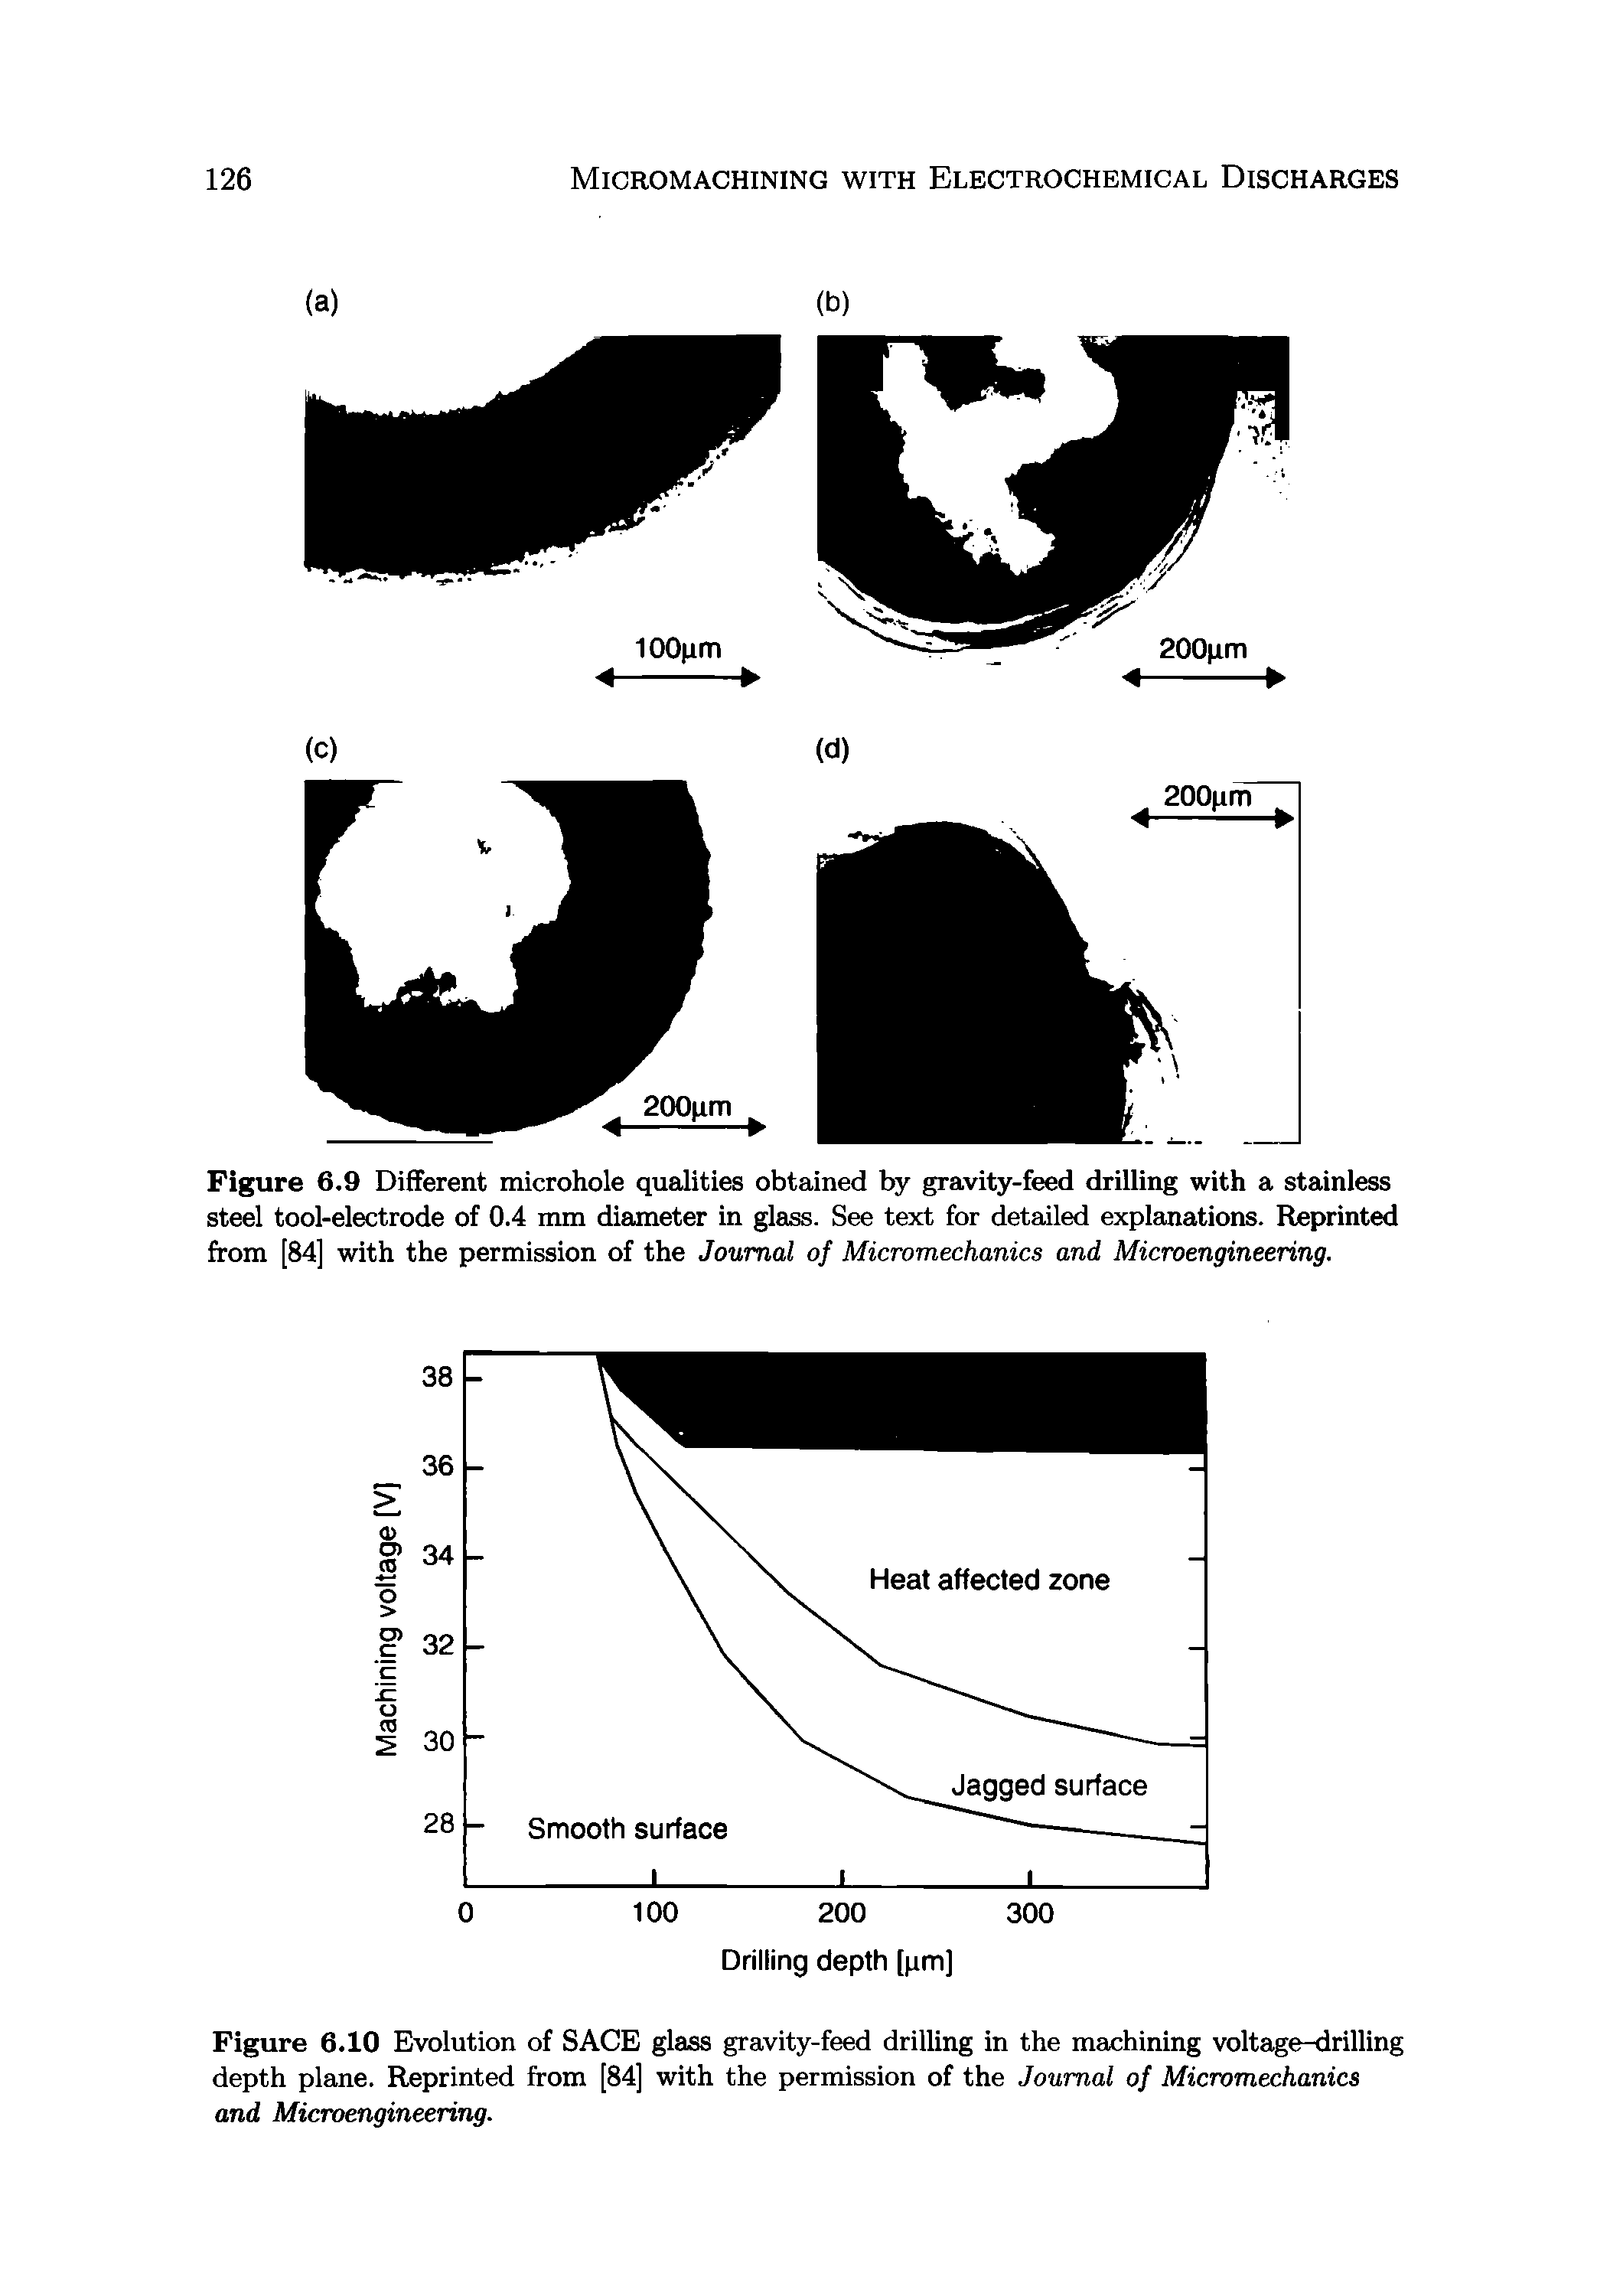 Figure 6.10 Evolution of SACE glass gravity-feed drilling in the machining voltage-drilling depth plane. Reprinted from [84] with the permission of the Journal of Micromechanics and Microengineering.